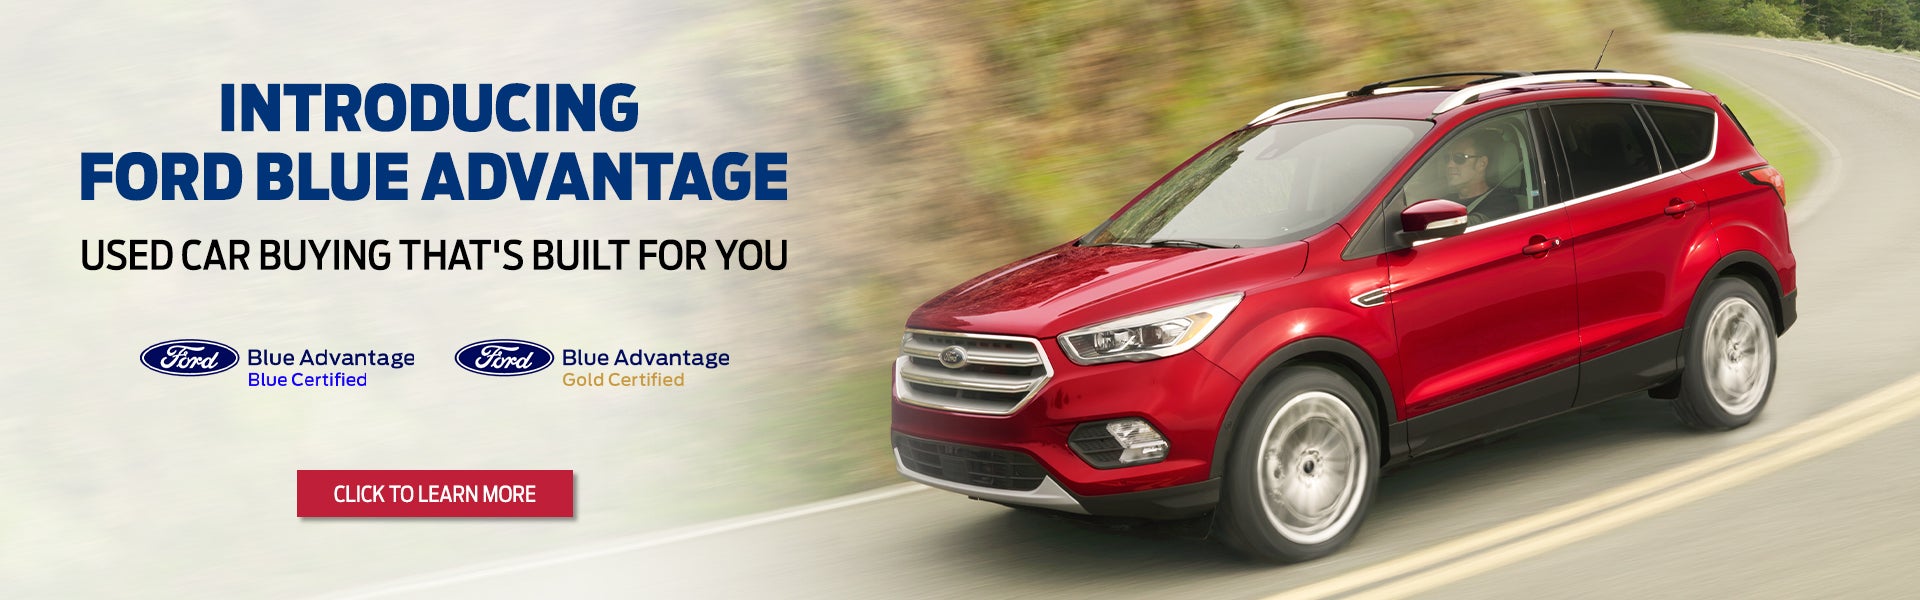 Introducing Ford Blue Advantage